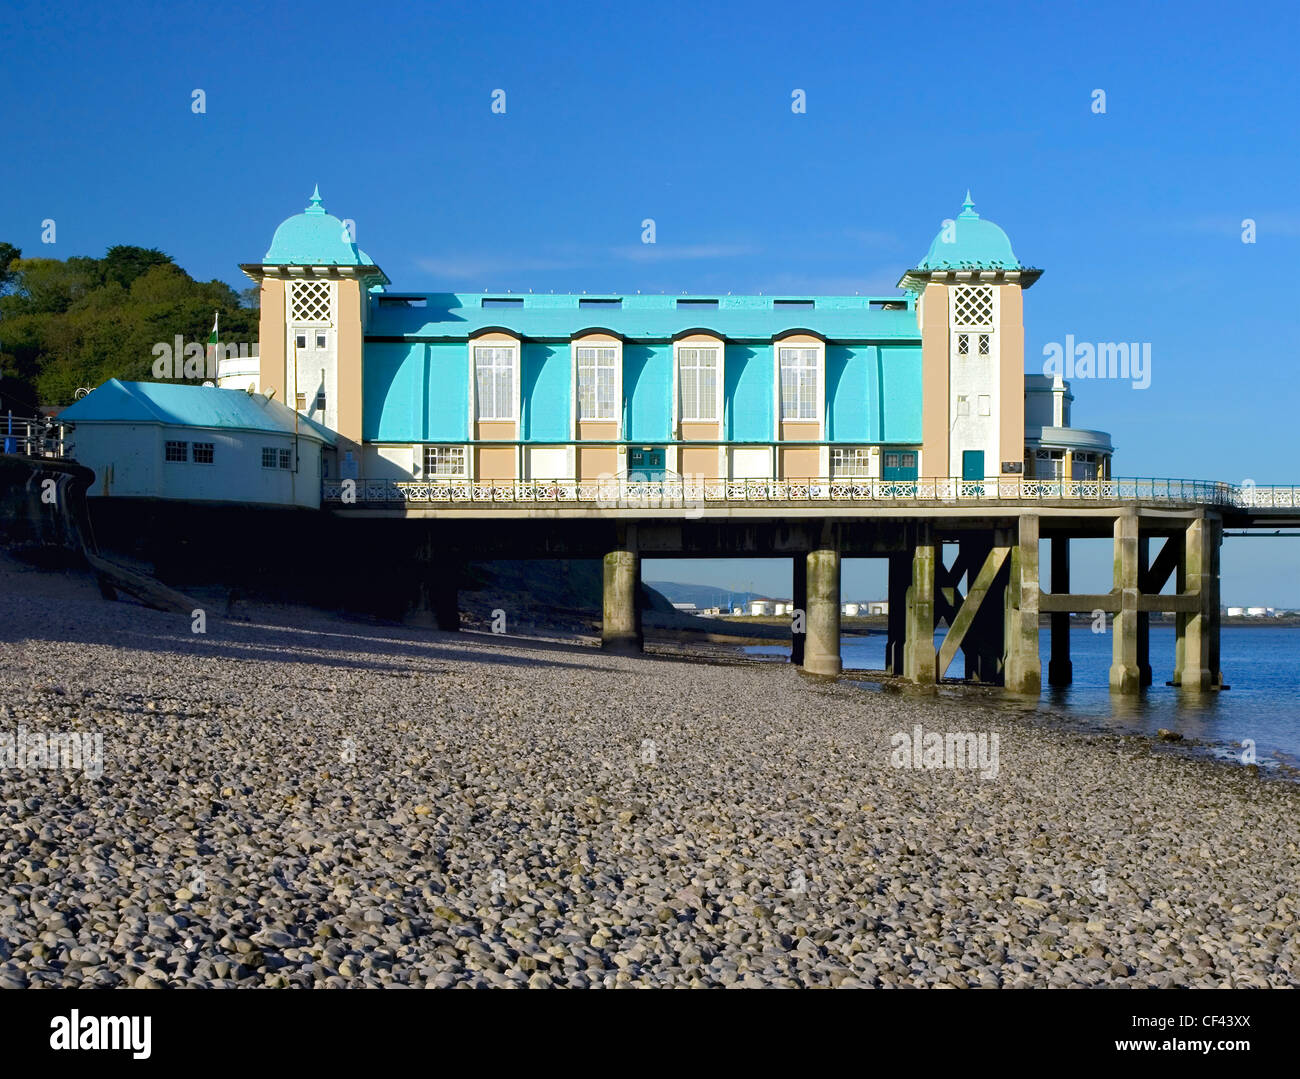 Looking across a pebbeld beach towards the Penarth Pavilion and Pier, a popular visitor attraction since it opened in 1895. Stock Photo